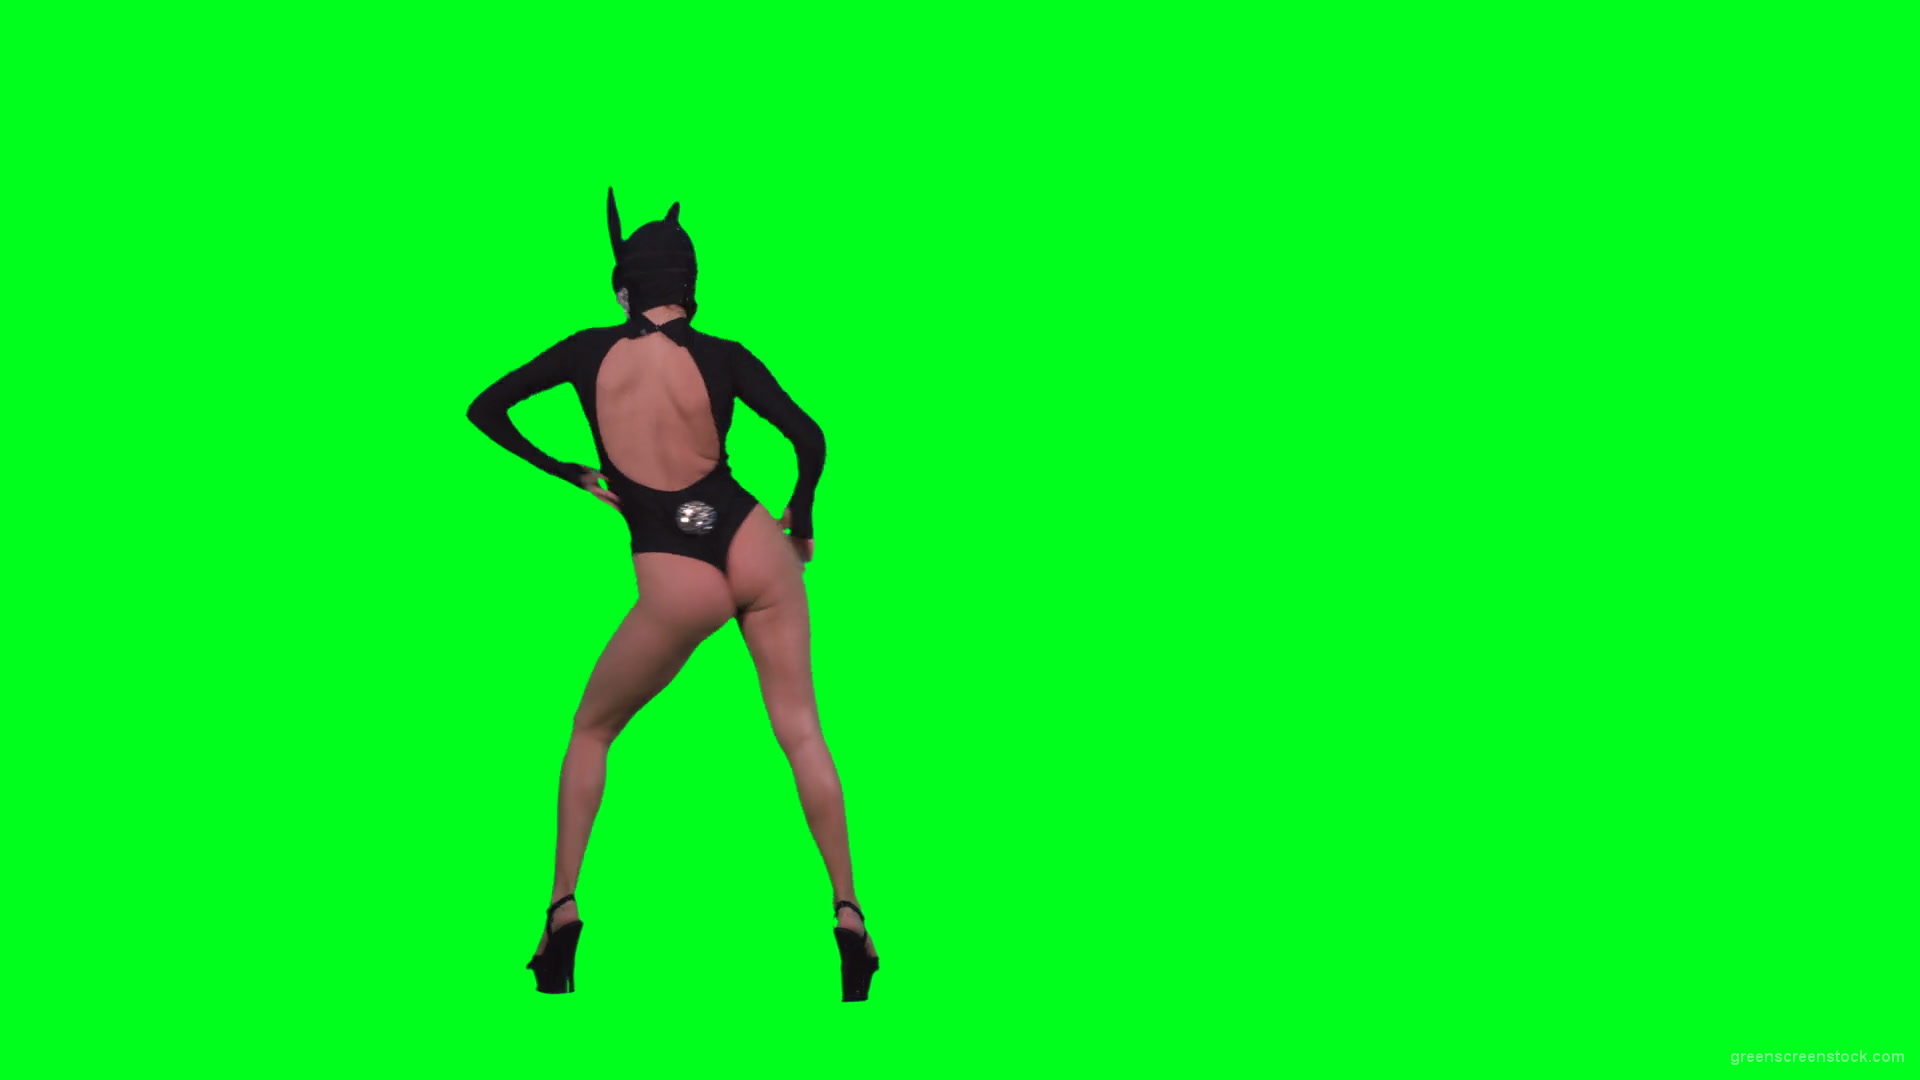 Amazing-black-banny-rabbit-girl-dancing-go-go-isolated-on-green-screen-RAVE-Video-Footage-1920_008 Green Screen Stock